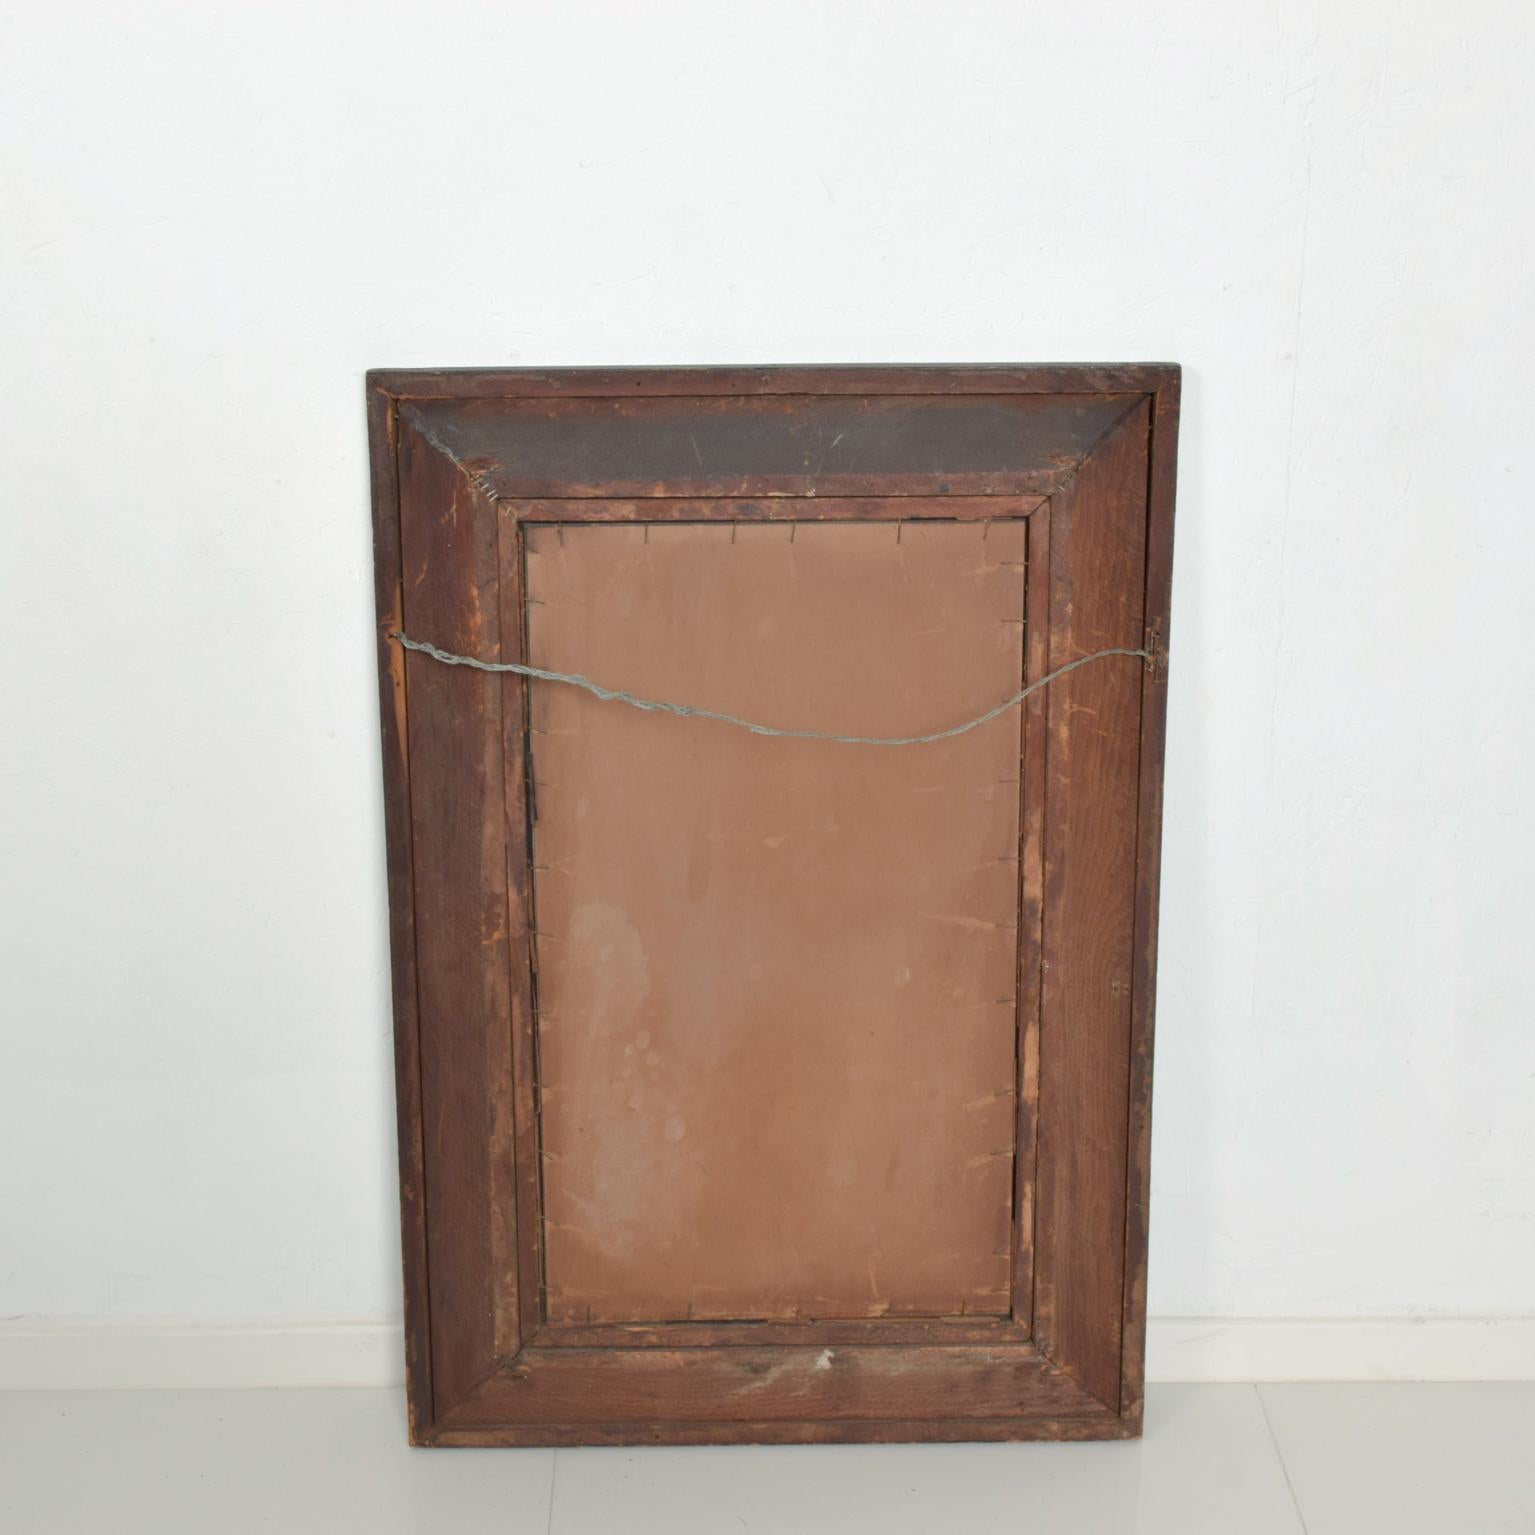 1930s Antique Art Deco Rosewood Wall Mirror
Vintage Patina and Oxidation Present. Expect vintage wear and use.
24.25 W x 35.25 H x 1 thick, Mirror 14.75 x 25.75
Original unrestored vintage condition.
Refer to Images.